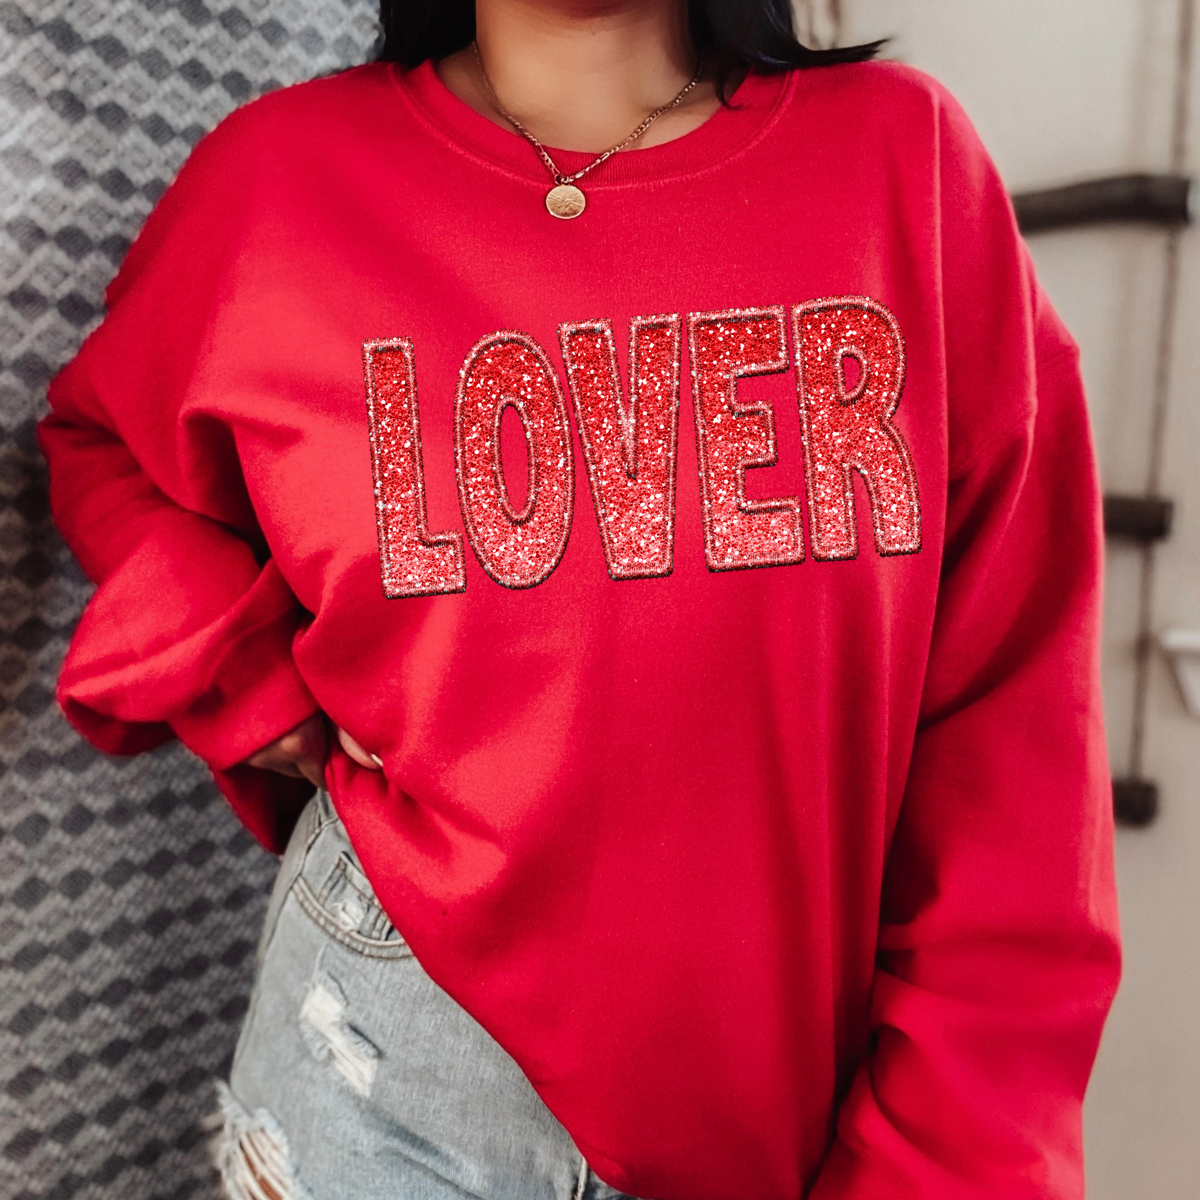 Lover Faux Embroidery Ombré Glitter in Red Digital Design, PNG